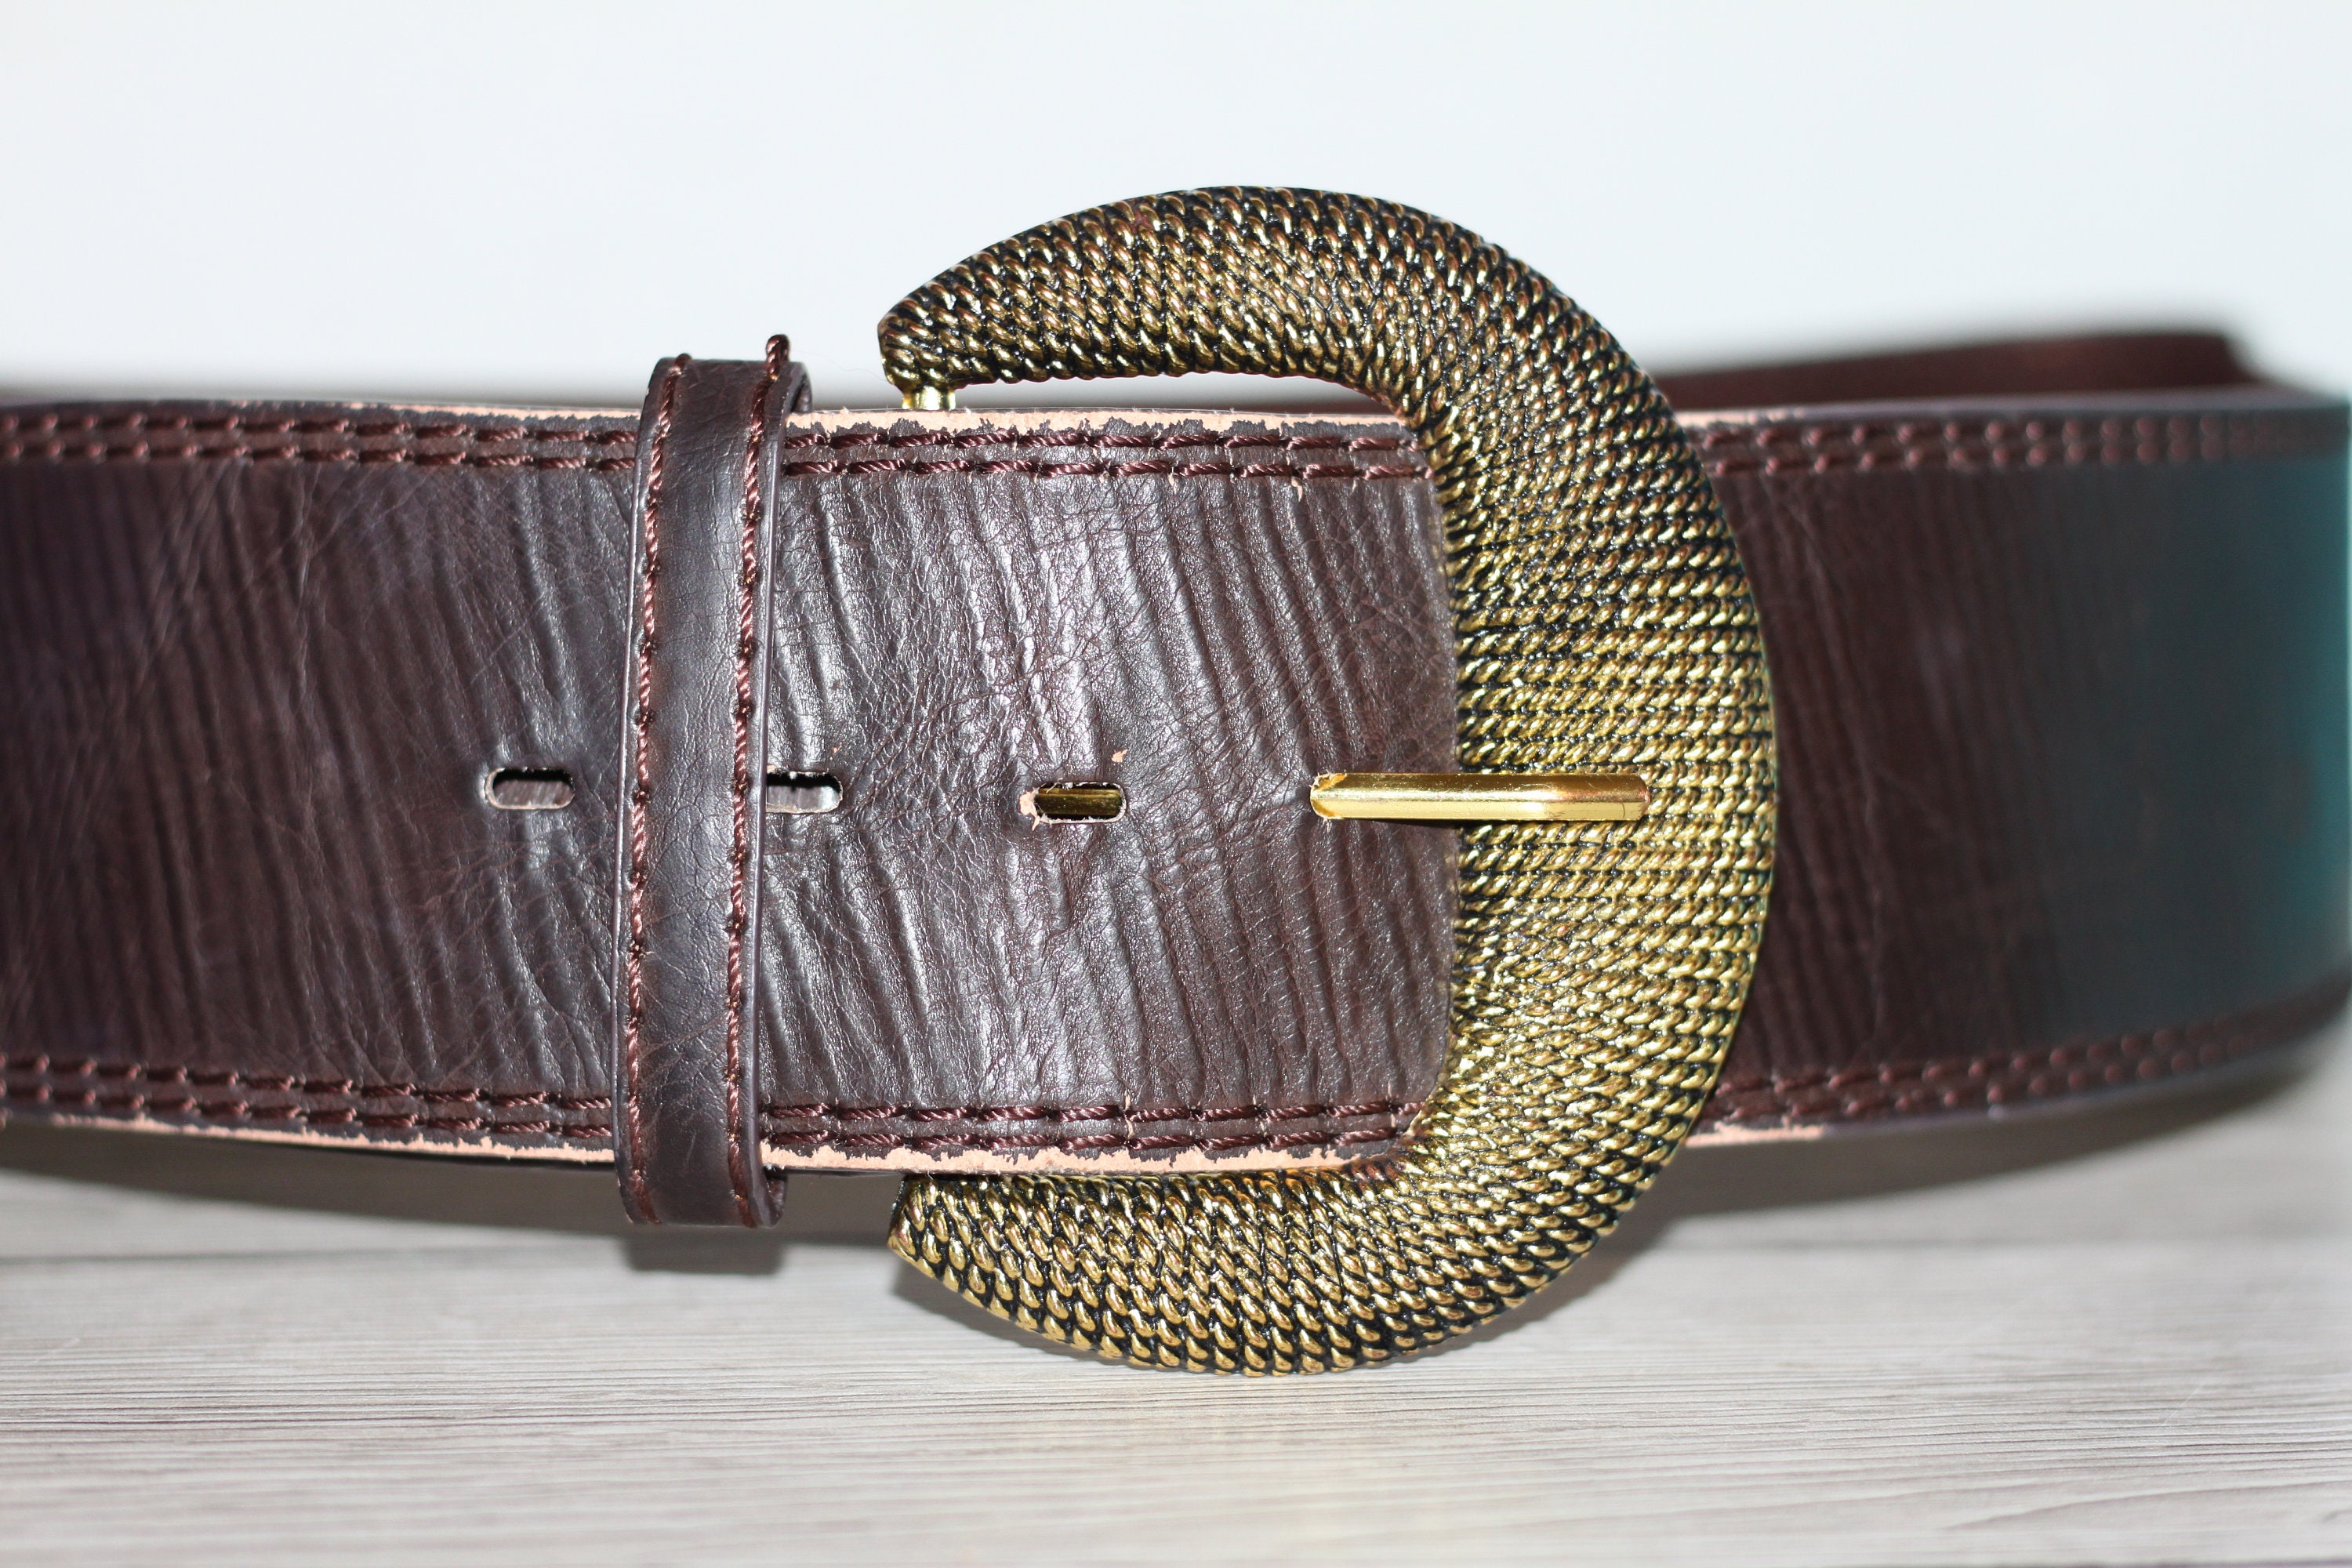 Brown Vintage Leather Belt With a Large Buckle - Etsy